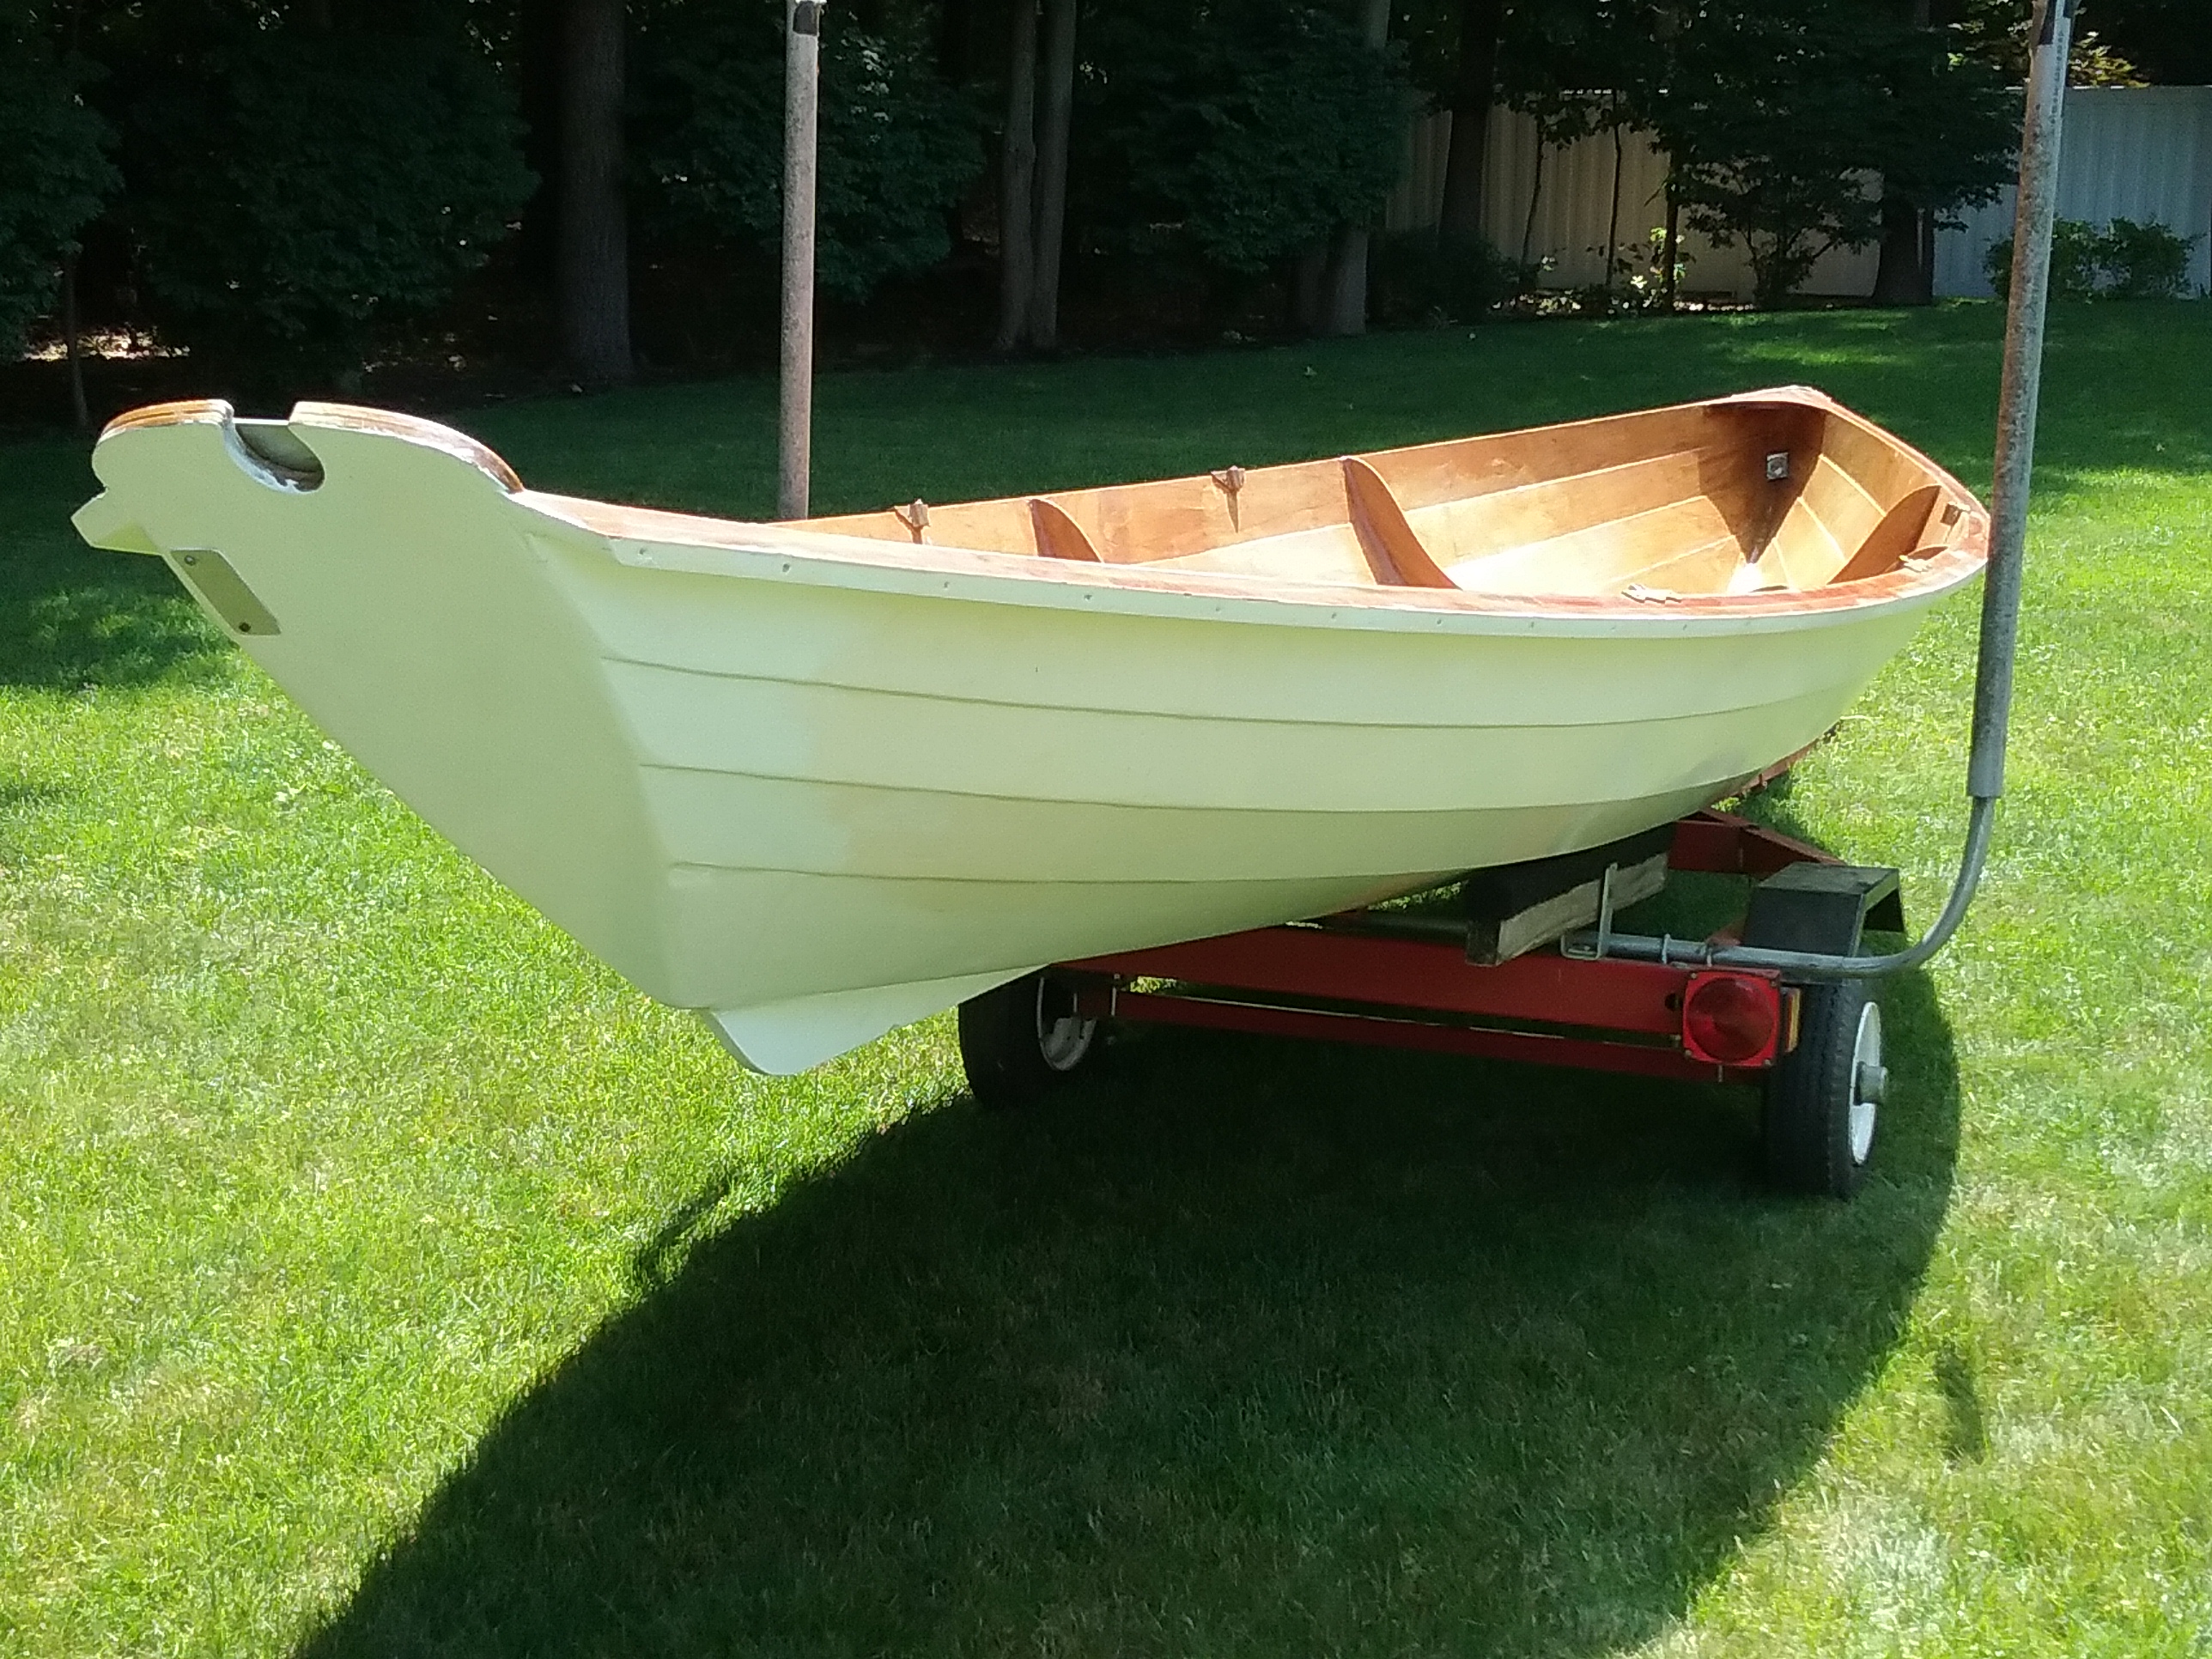 2009 17 foot Chesapeake northeaster dory Rowboat for sale in Grand Haven, MI - image 4 